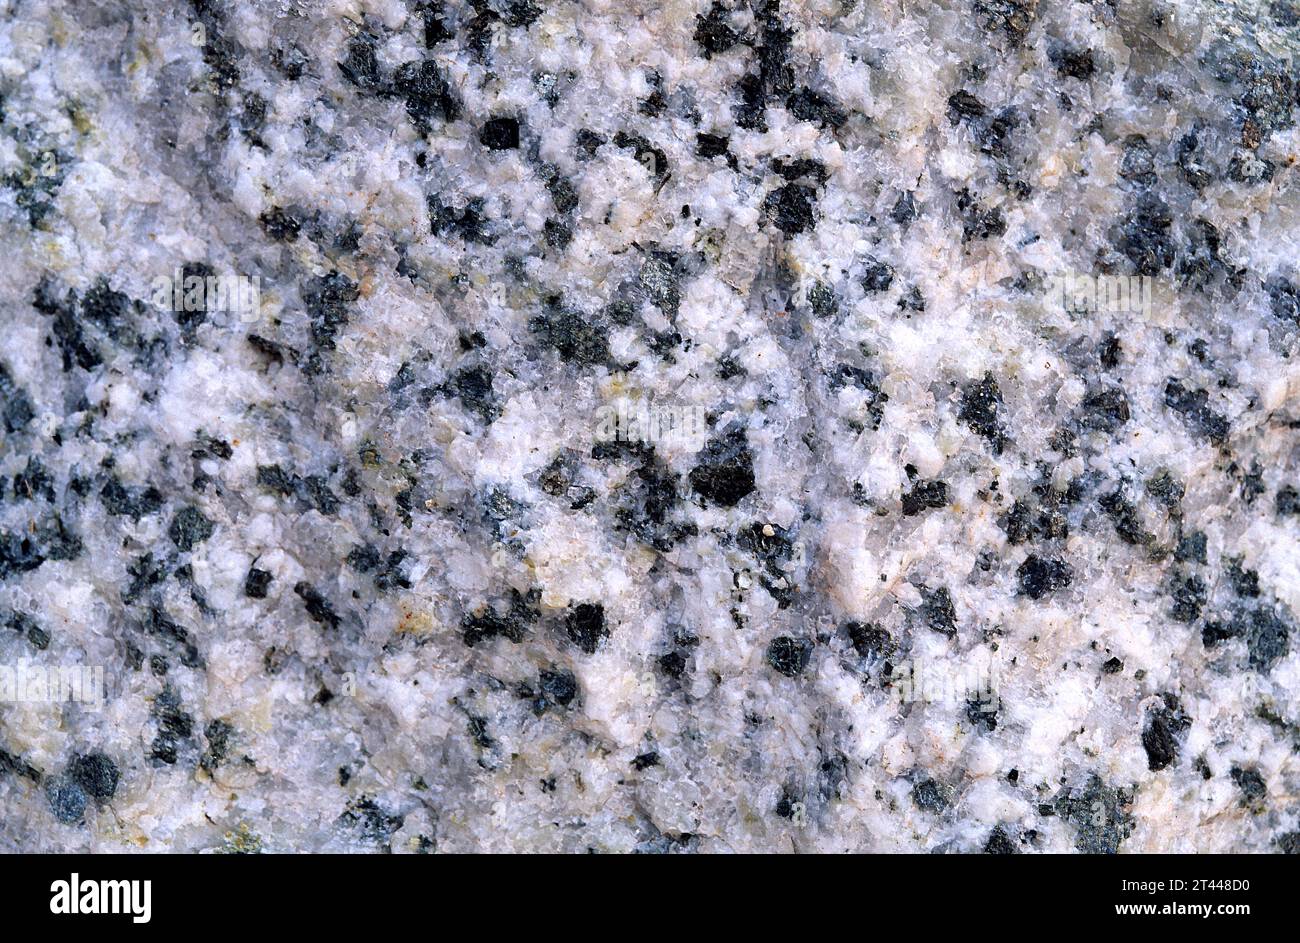 Granite is an igneous intrusive rock with holocrystalline texture. Surface detail. Stock Photo